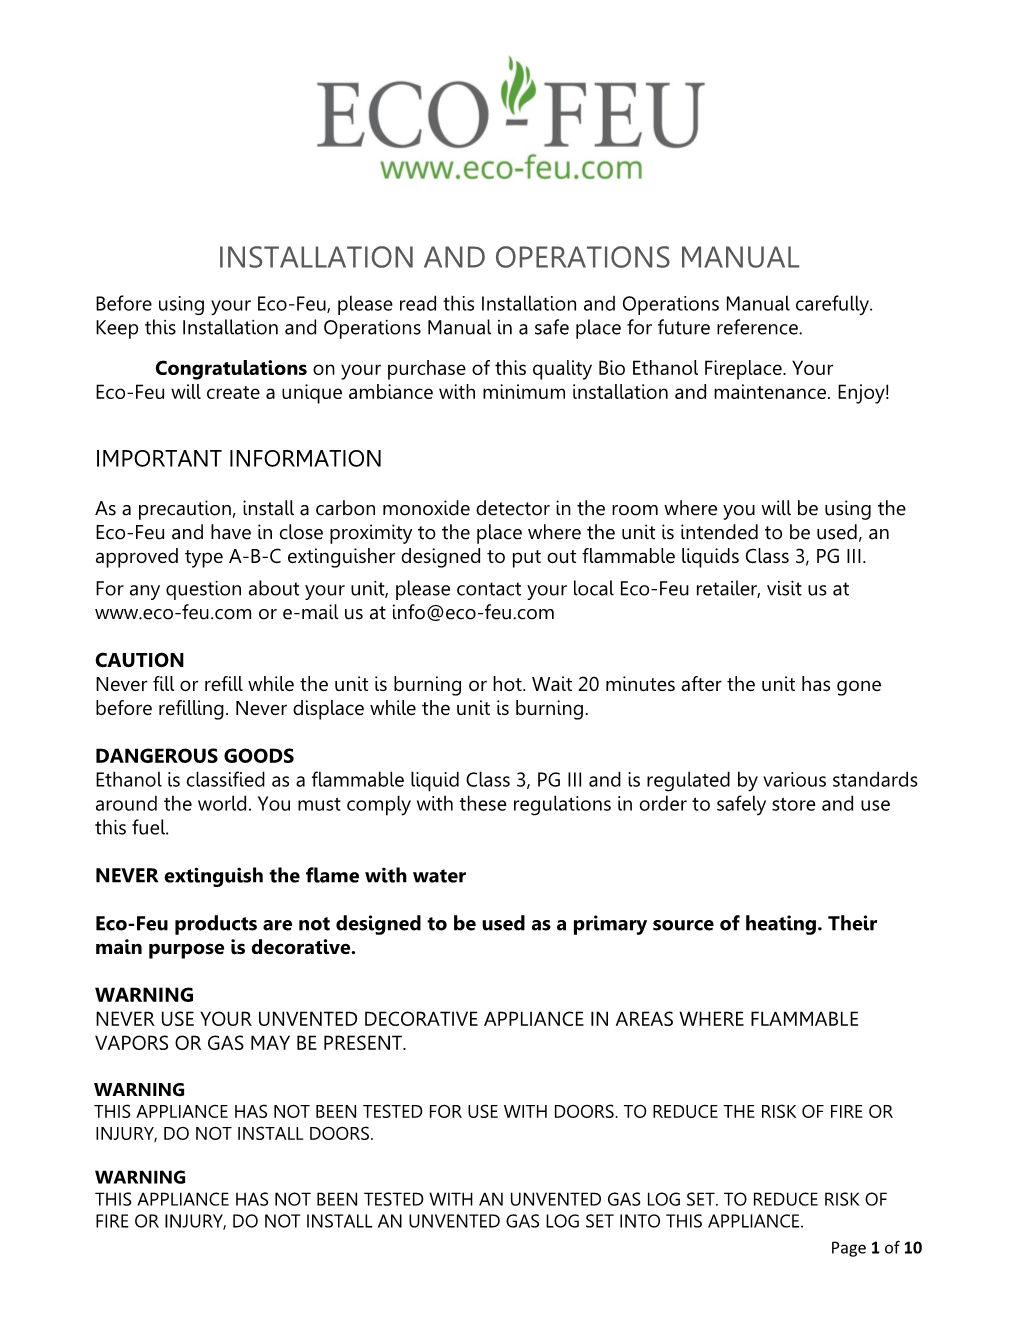 Installation and Operations Manual